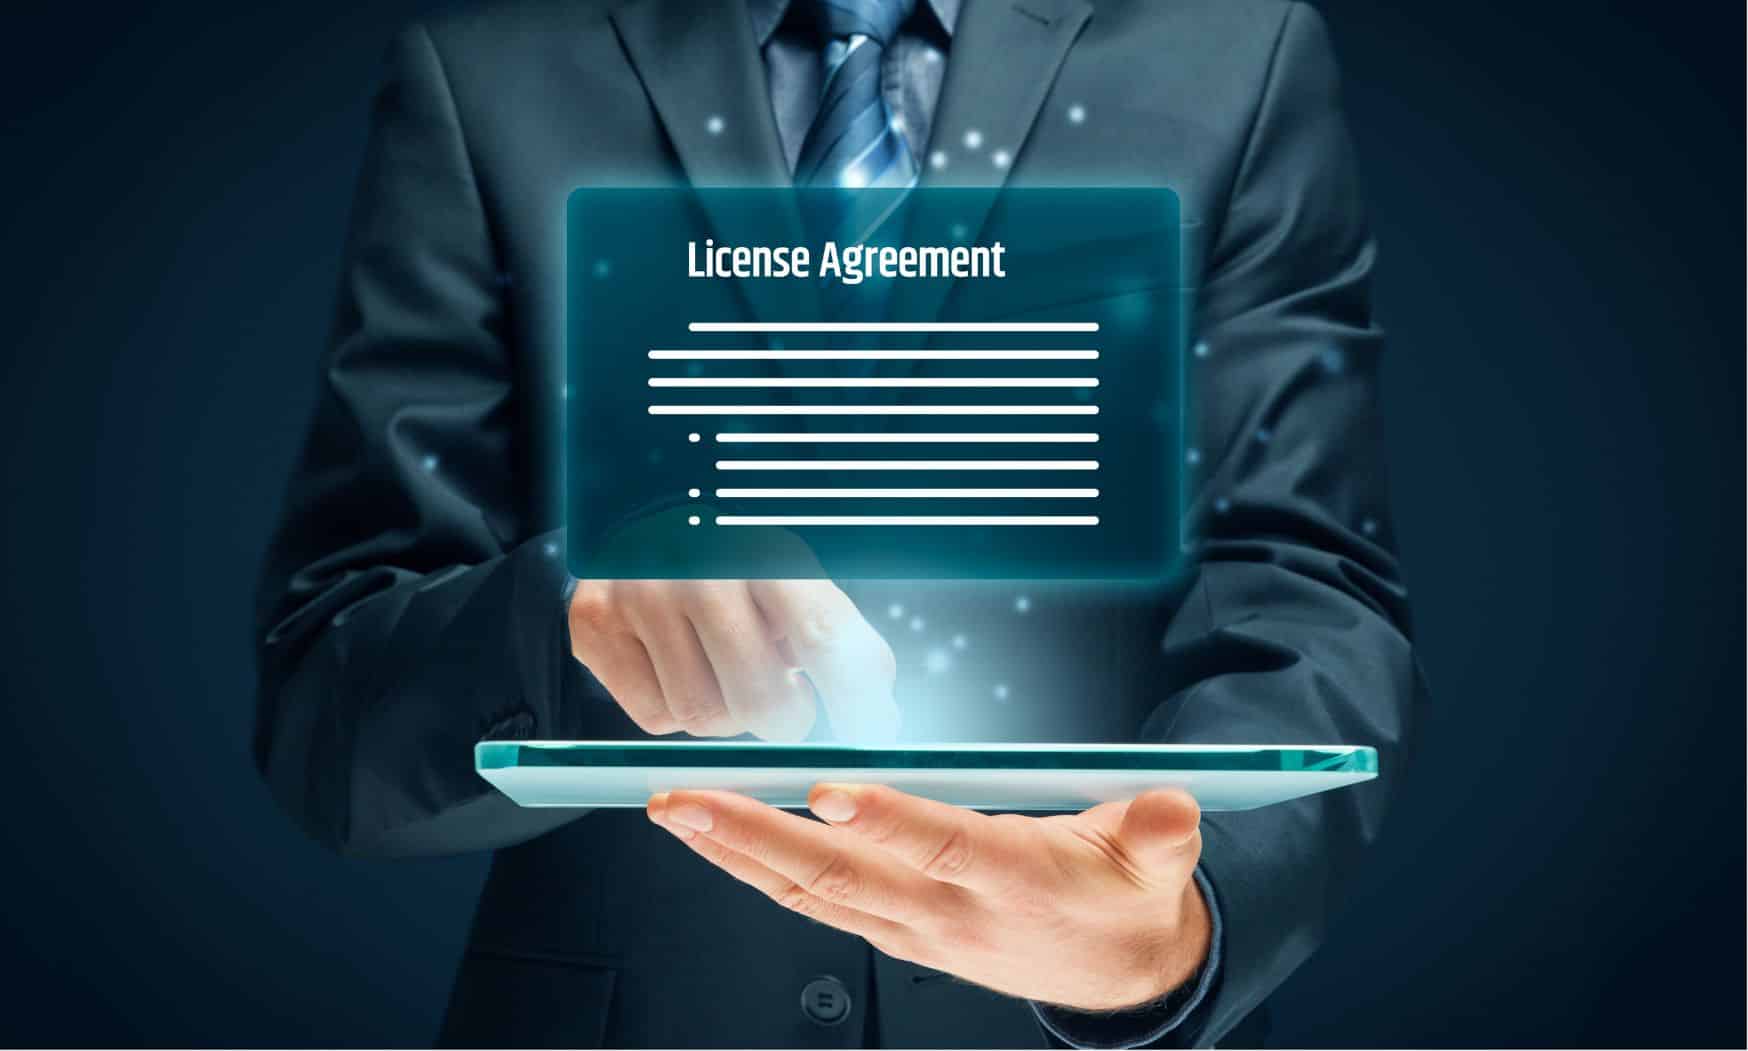 Ways to apply for your business license